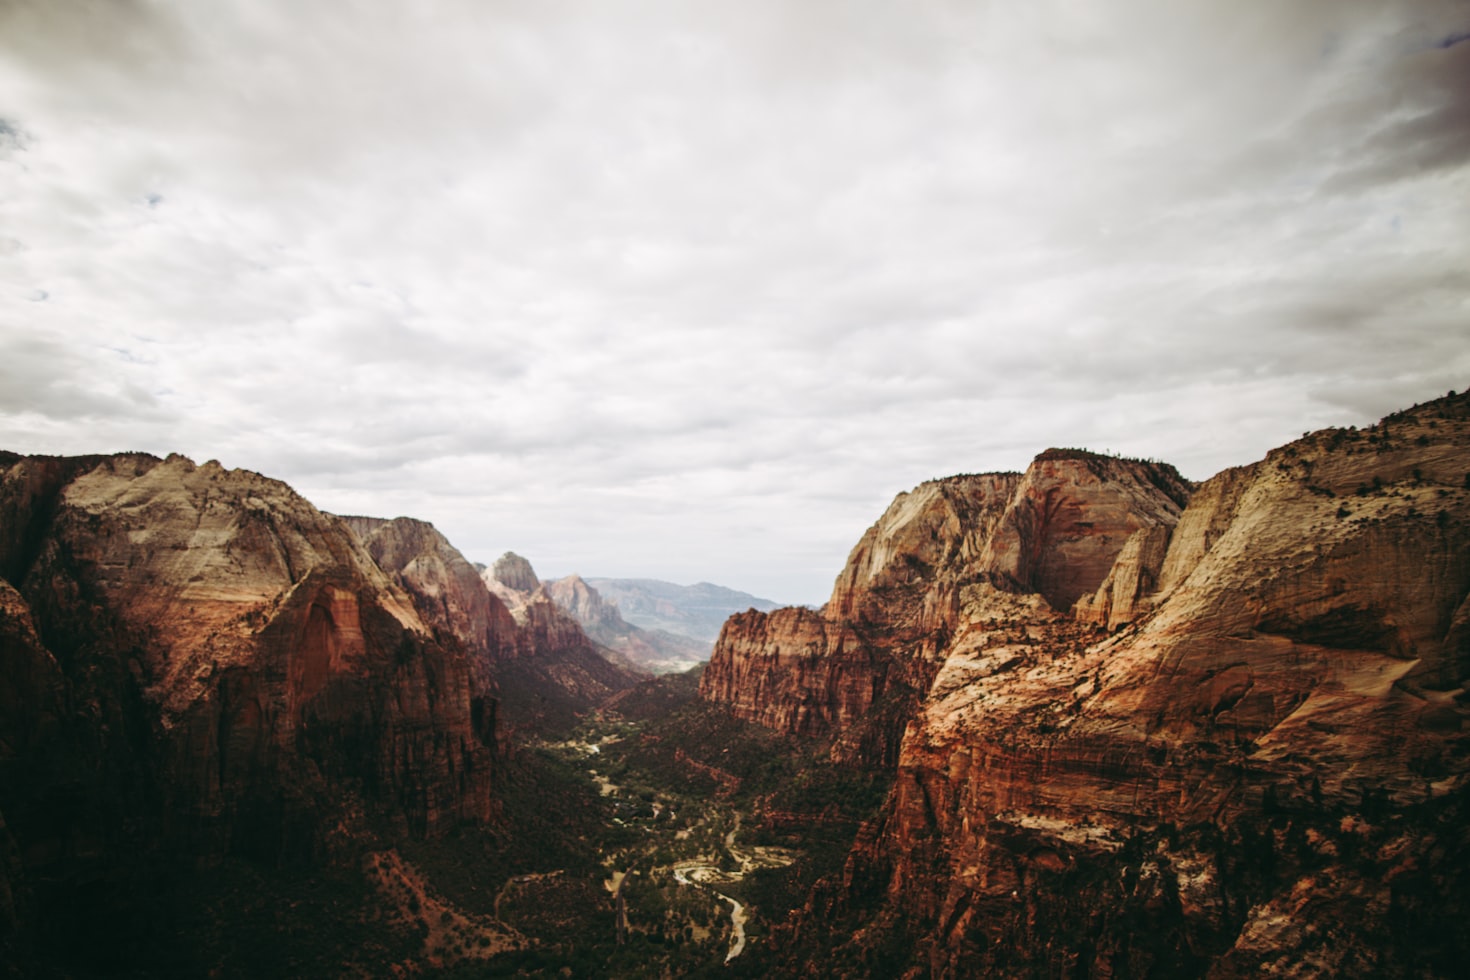 Zion National Park, one of the best soul-searching destinations in the USA